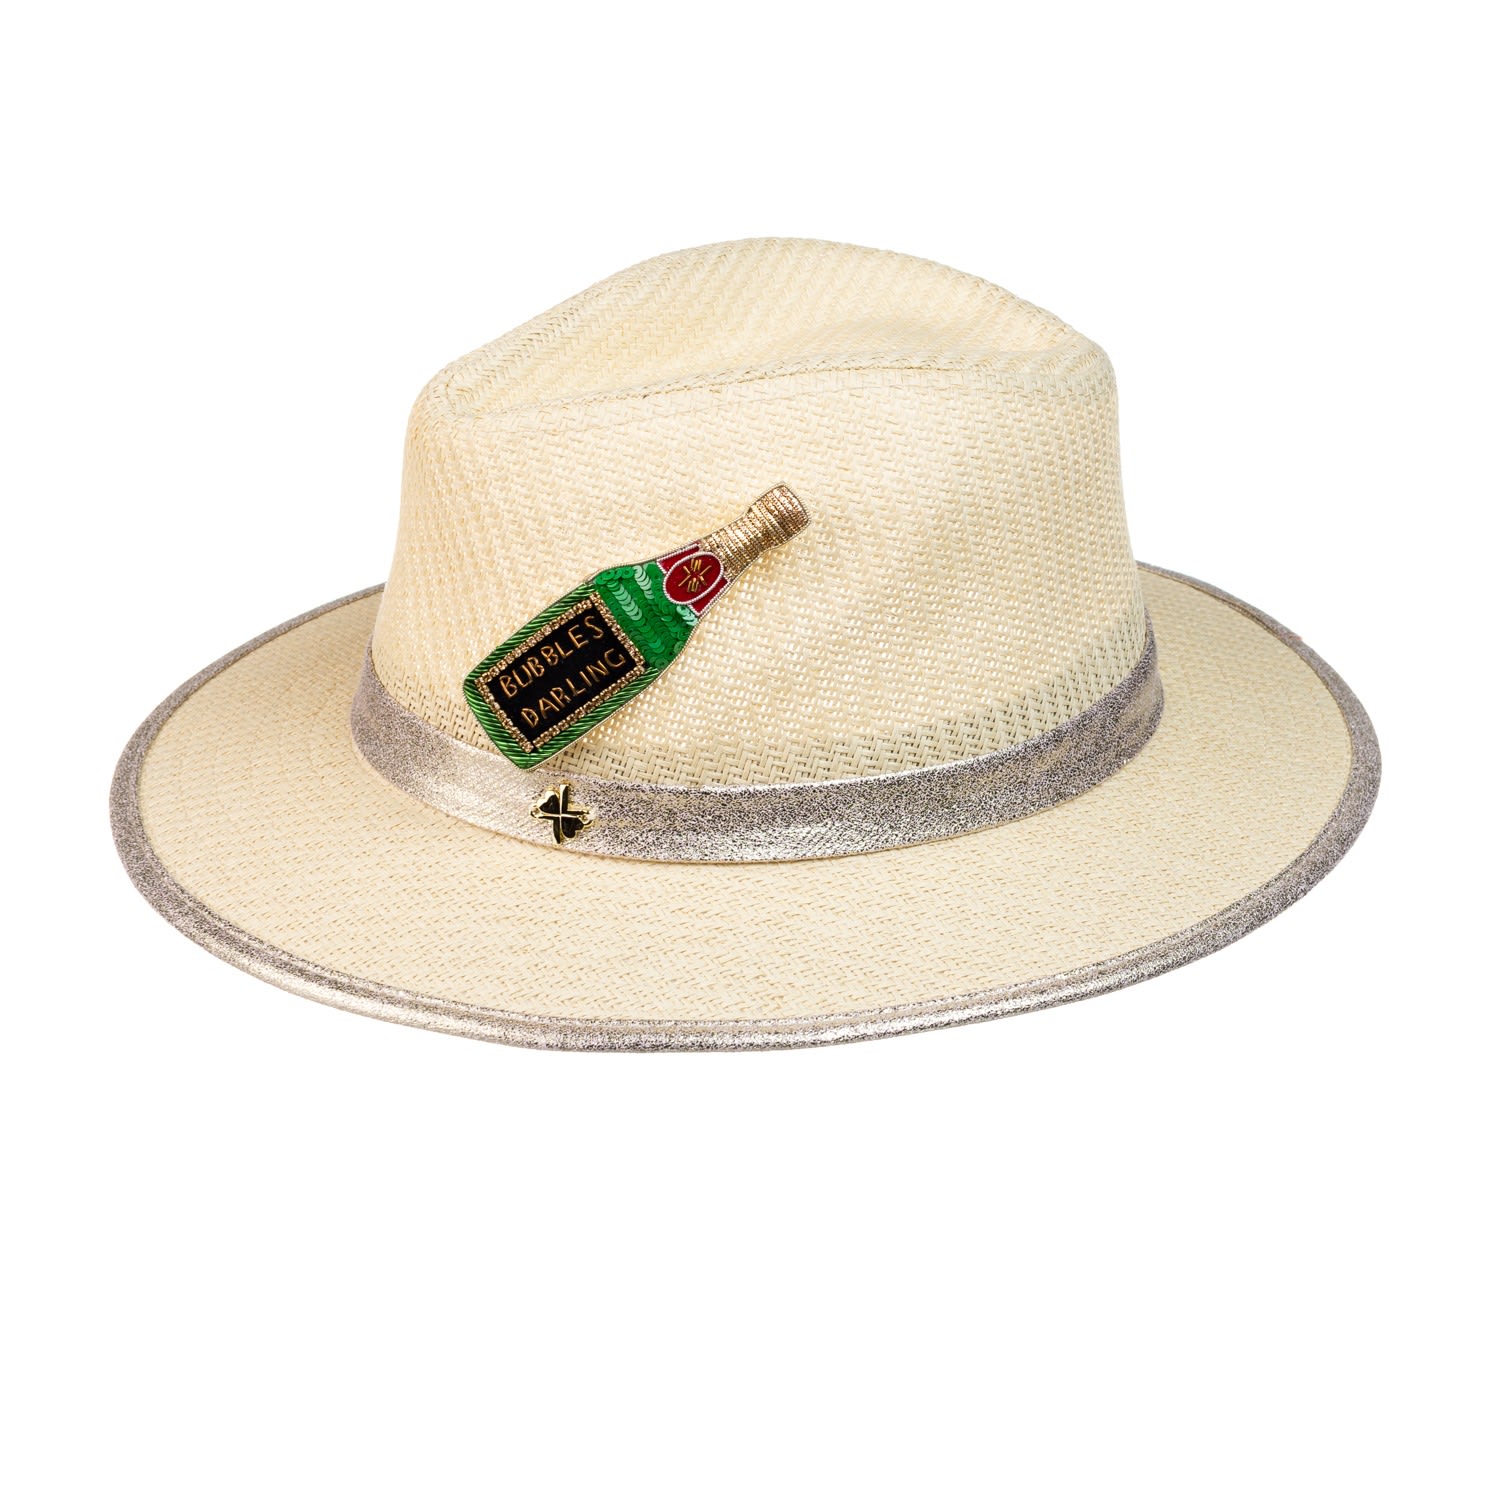 Women’s Neutrals Straw Woven Hat With Embellished Bubbles Darling Brooch - Cream One Size Laines London